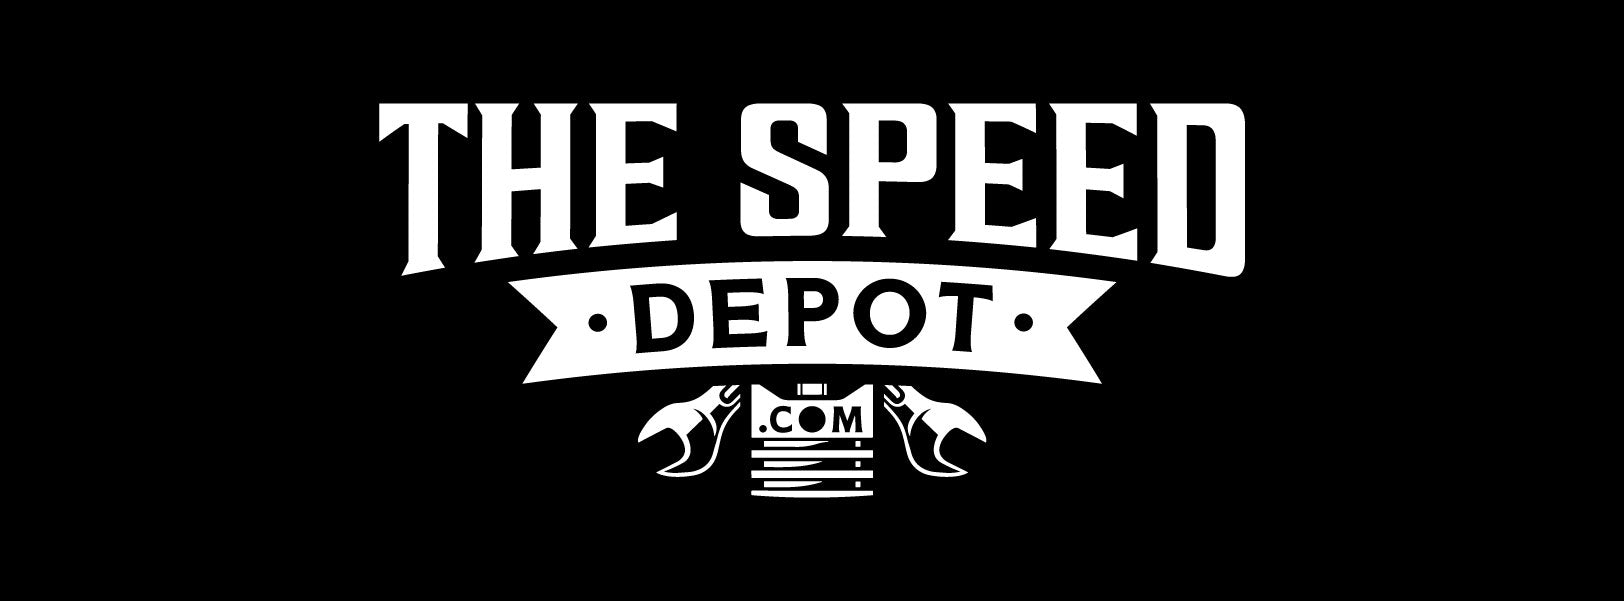 Welcome to TheSpeedDepot.com!